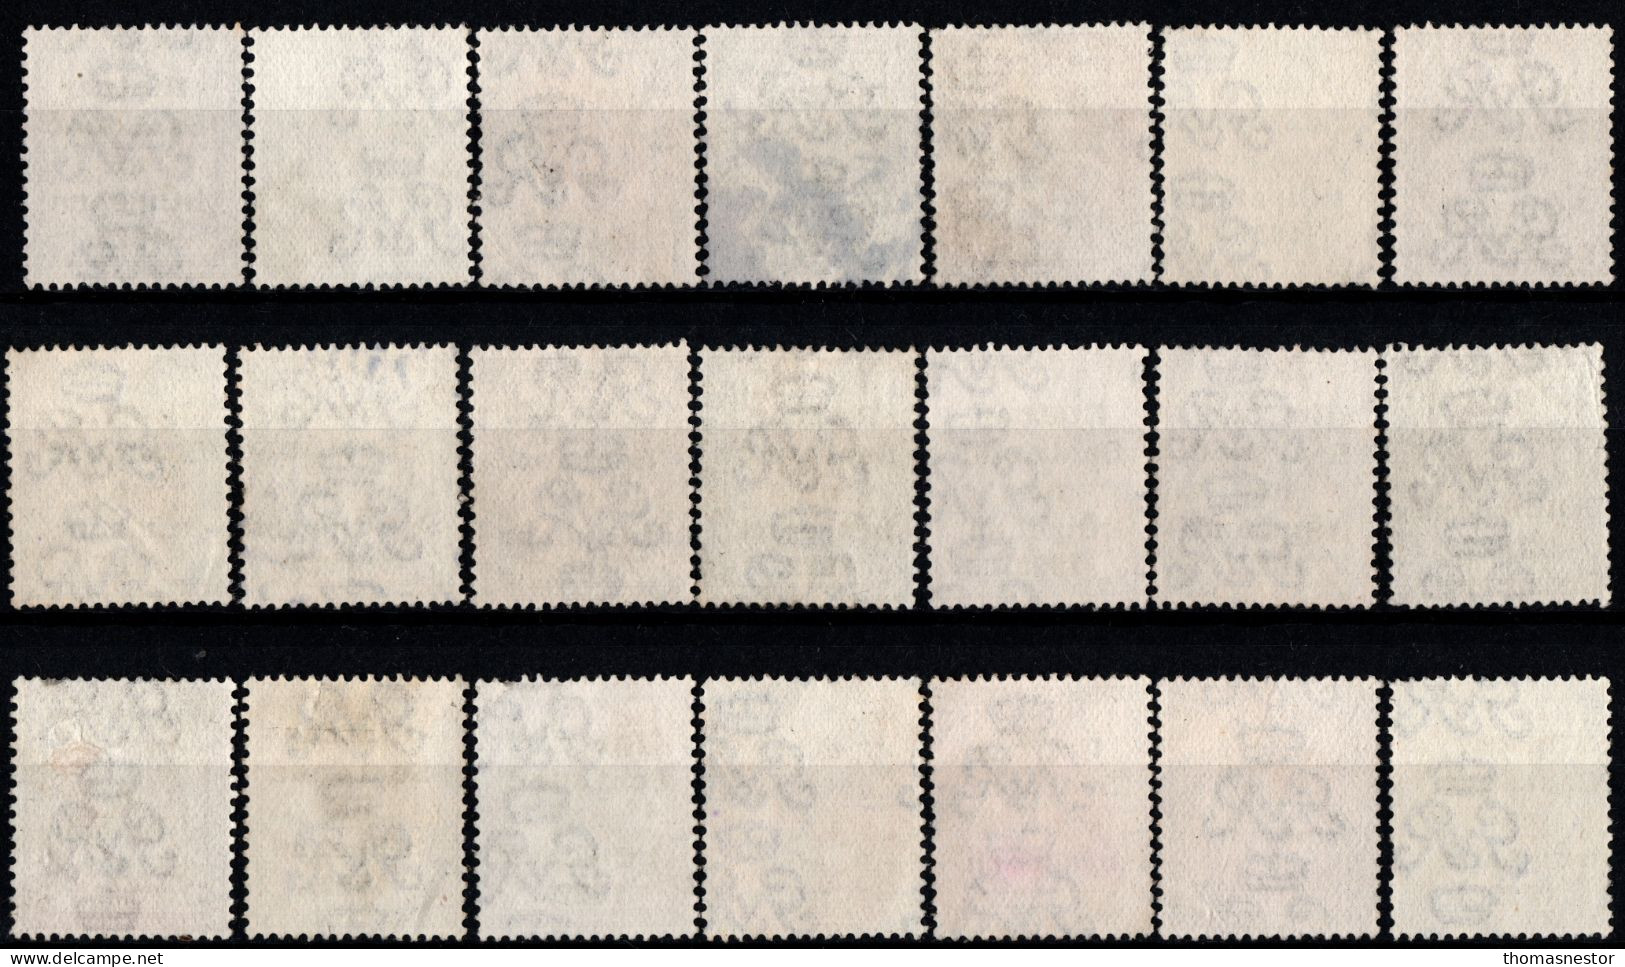 1922 Thom Rialtas 5 line Blue Black Ink (July- Nov) Used Fiscal cancellation, parcel/ commercial cancel 294 in total.